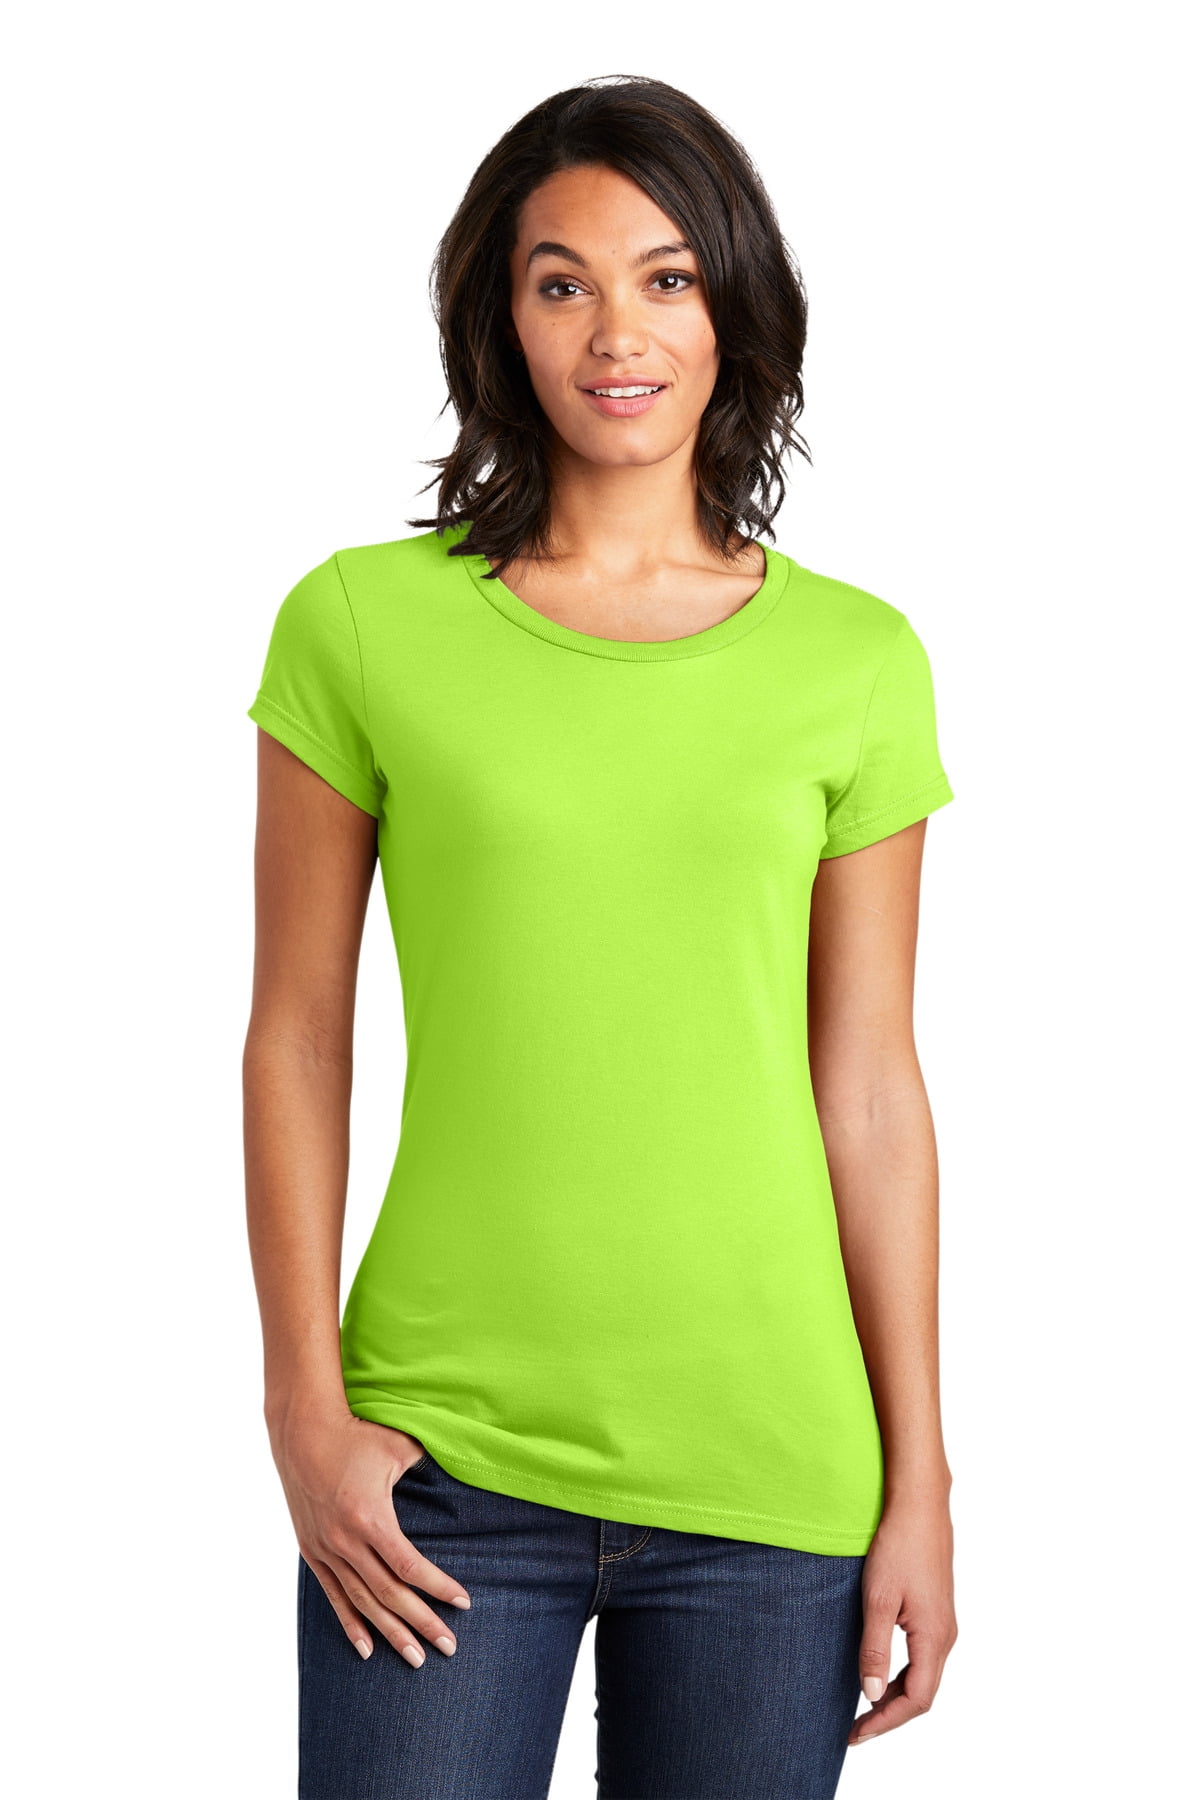 District DT6001 Juniors Very Important Tee , Lime Shock, M